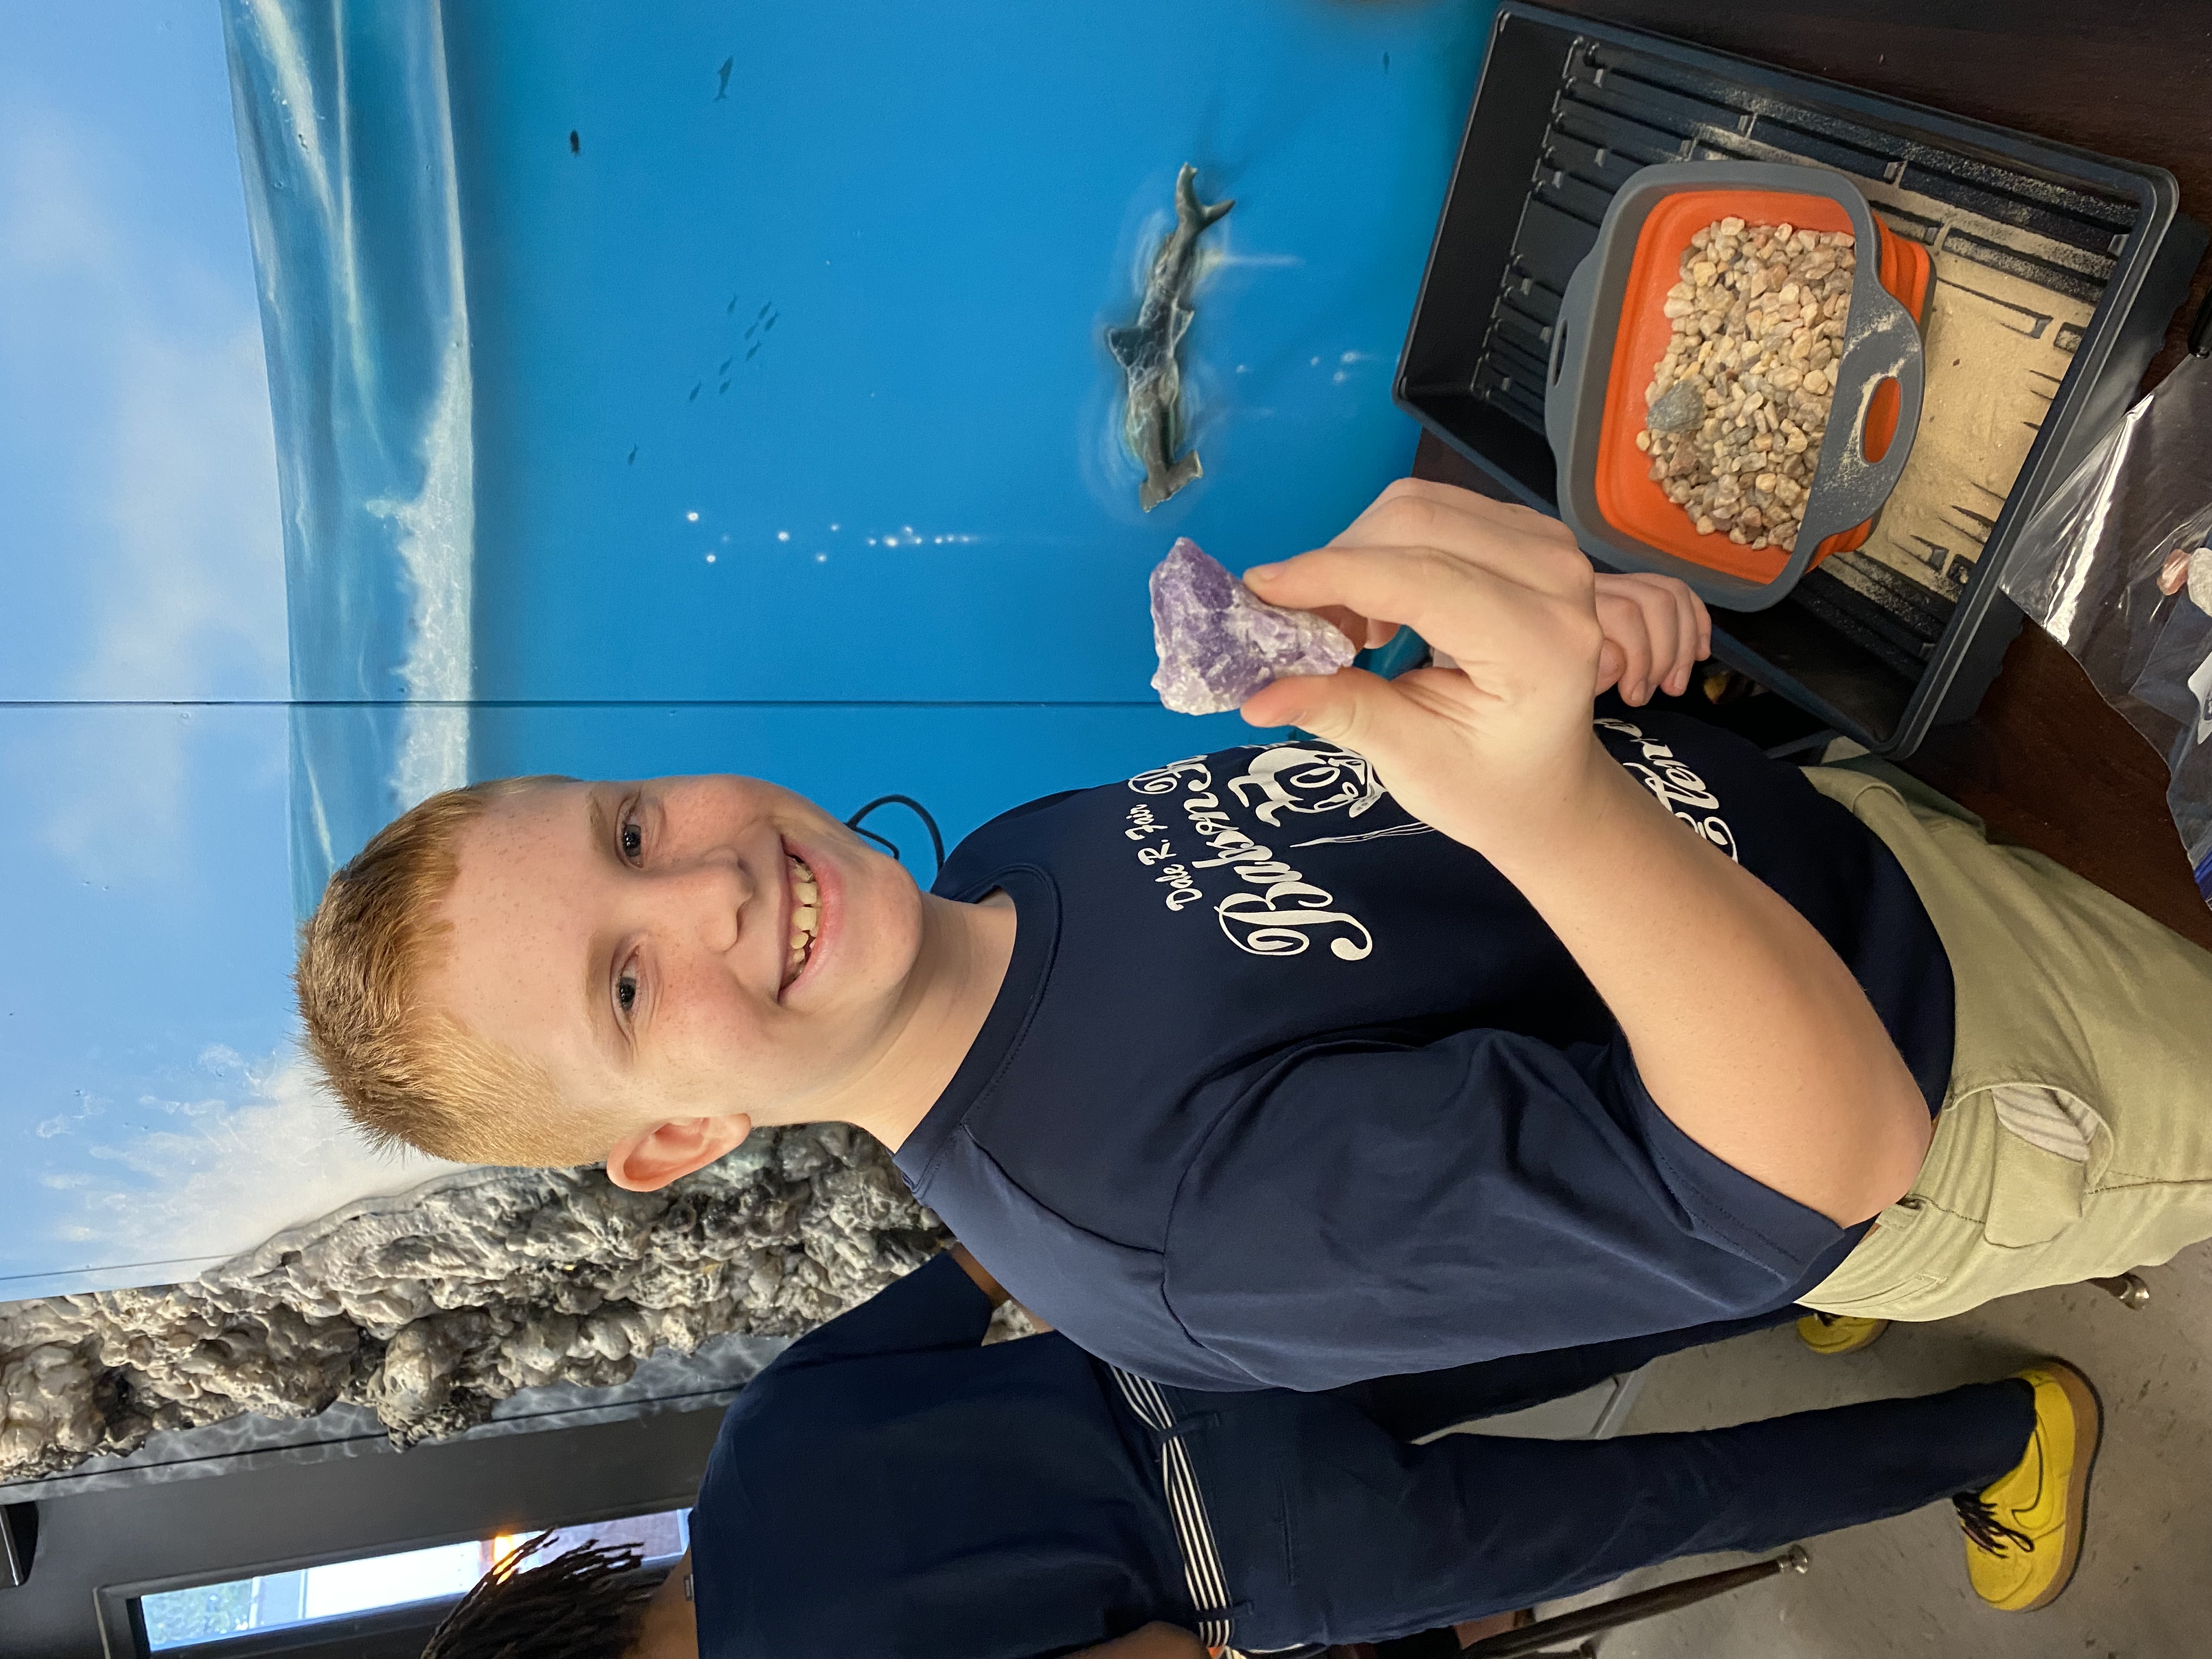 One of students excited to show off their findings from their mining for rocks and minerals.